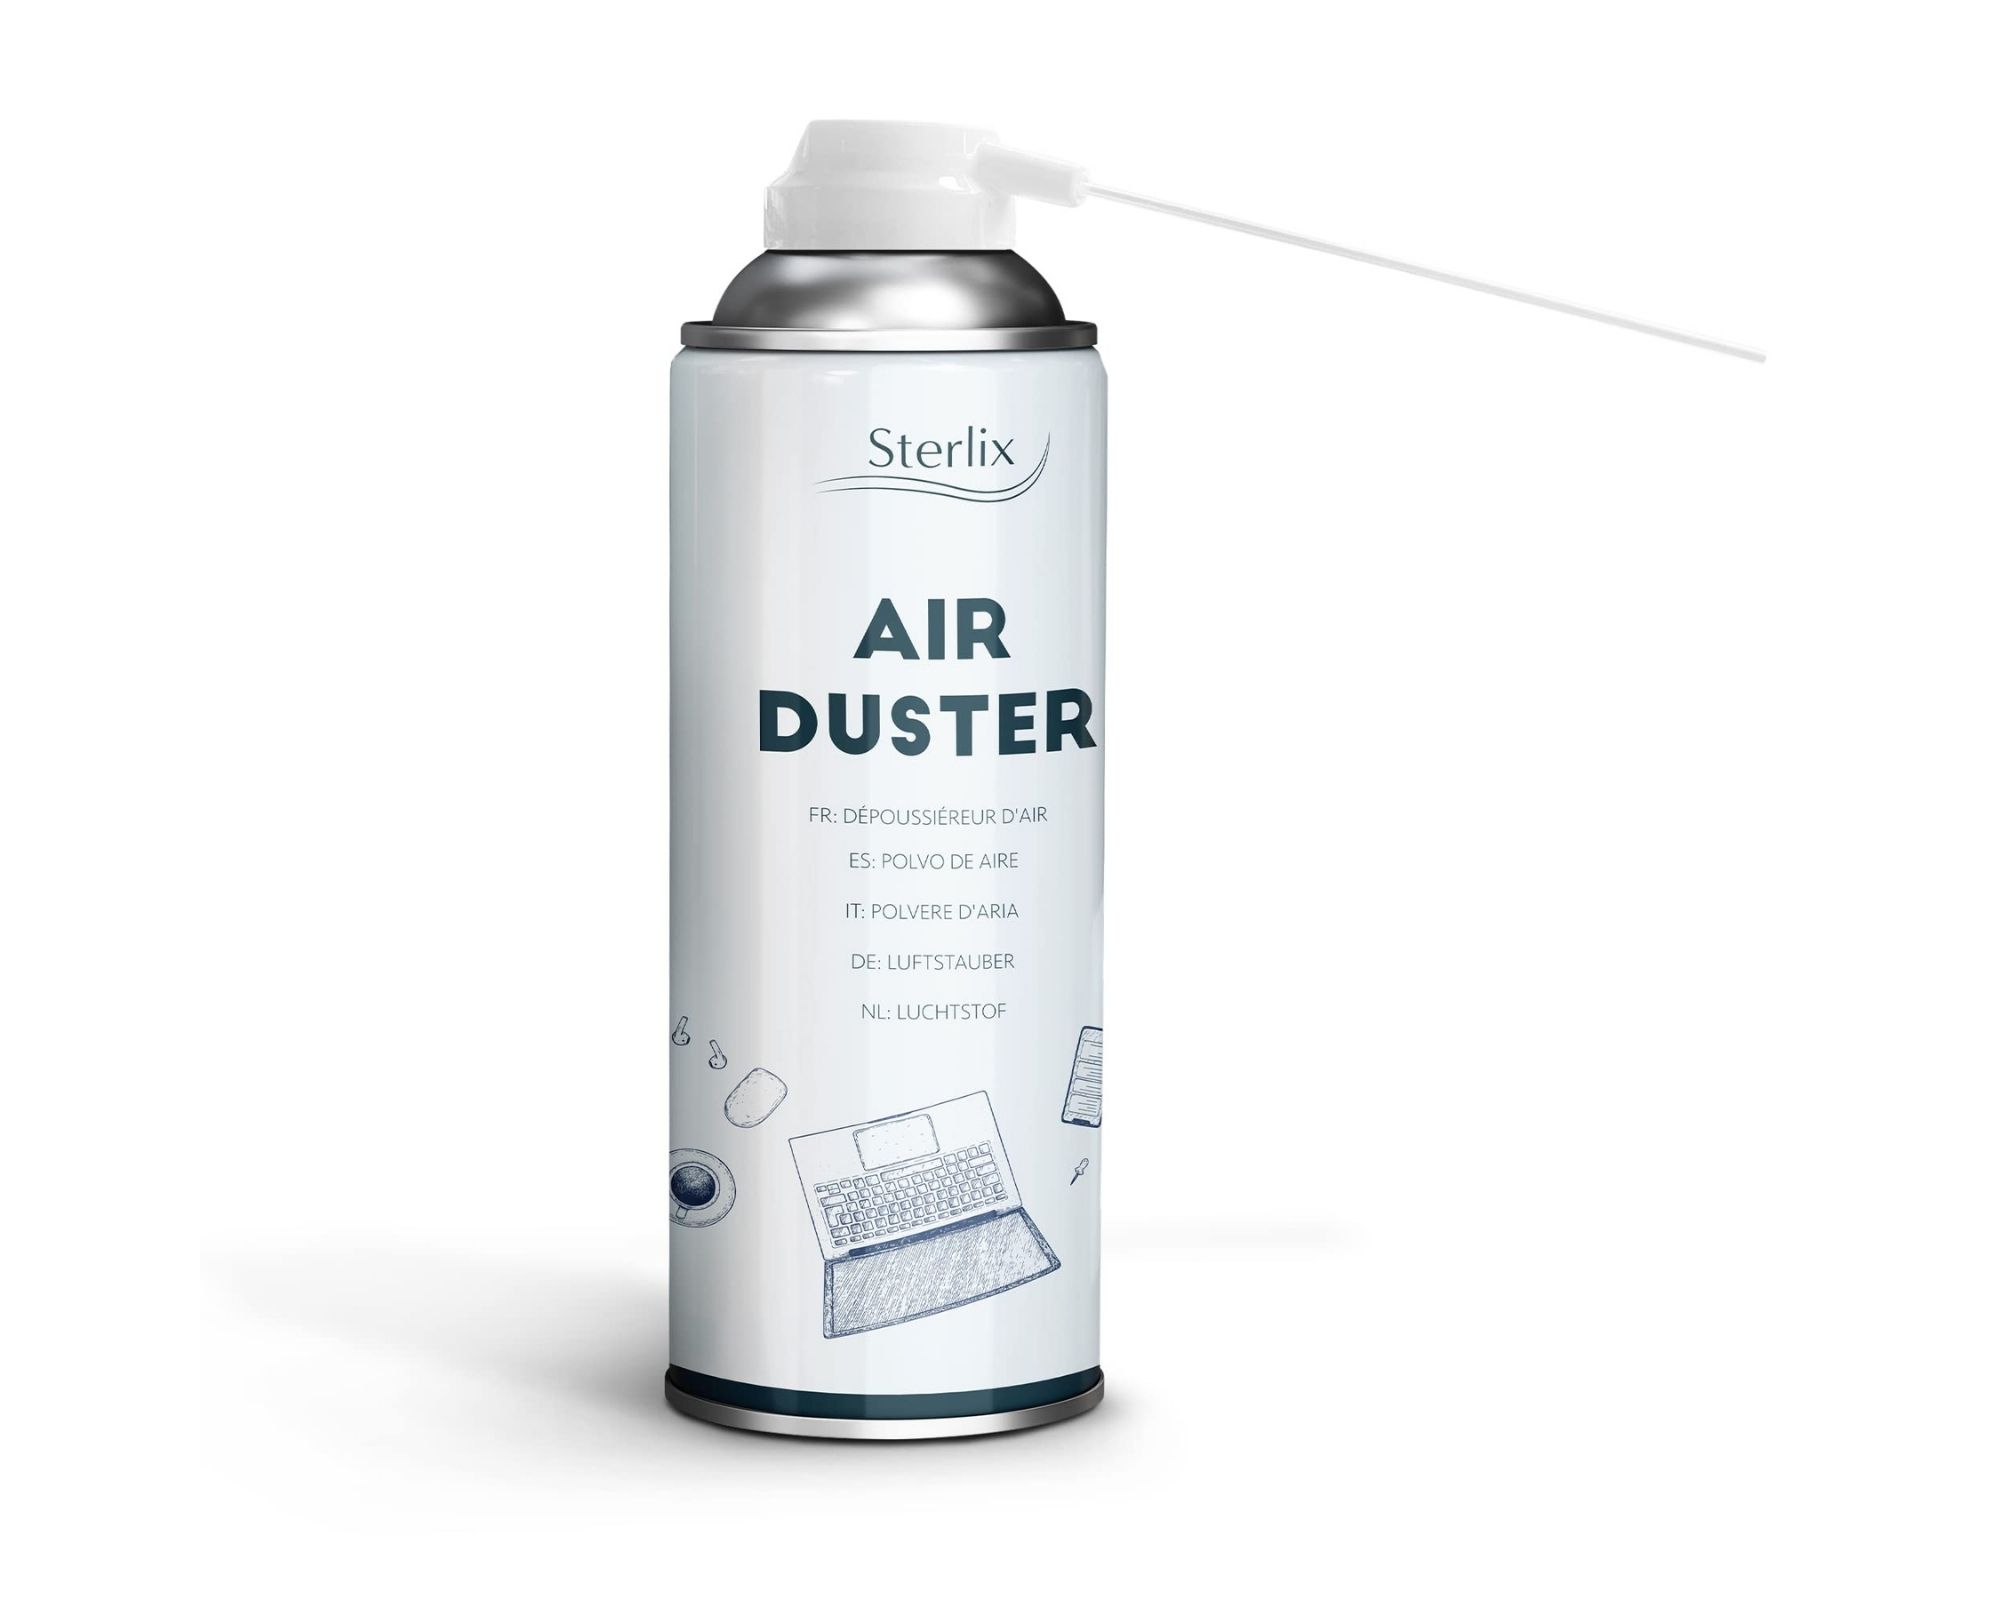 Is all air duster (canned air) the same?